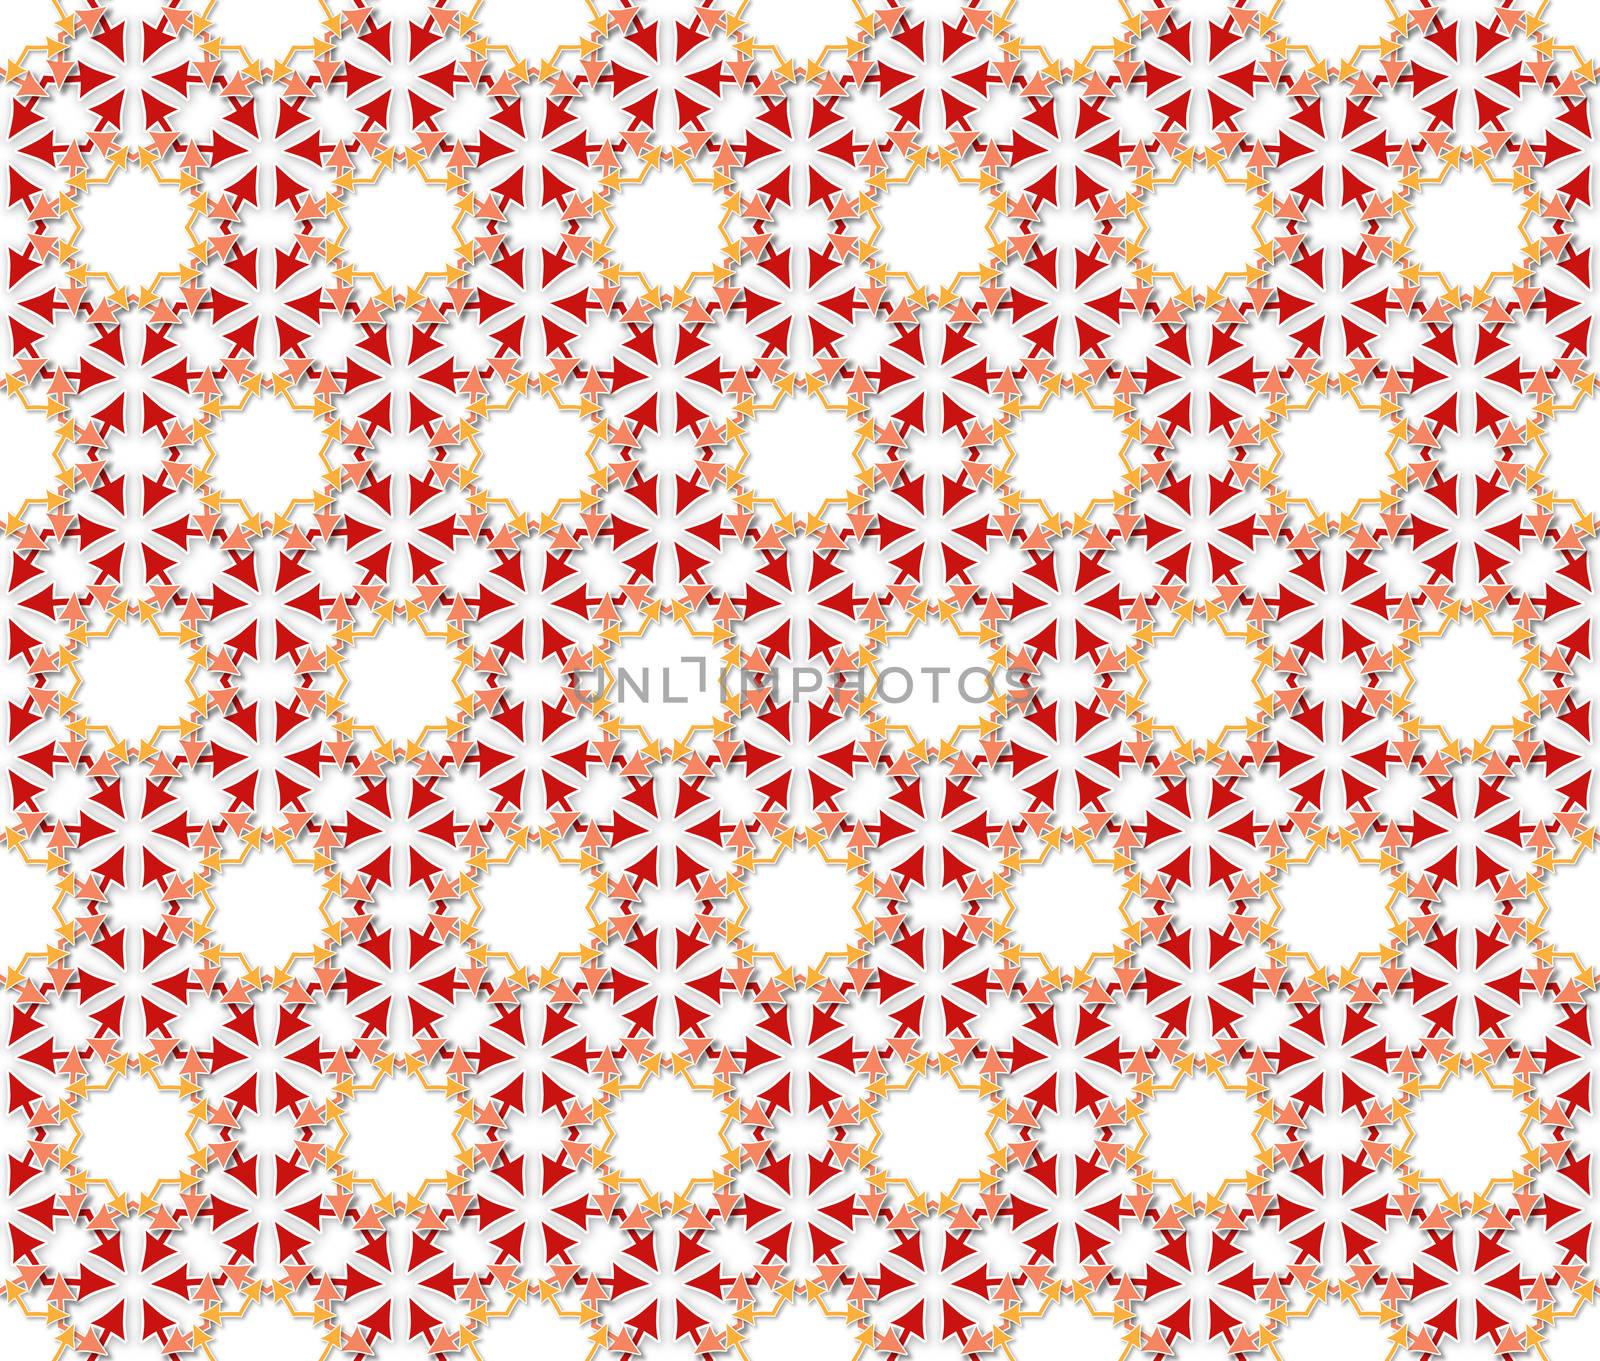 abstract background or fabric arrows flowers pattern